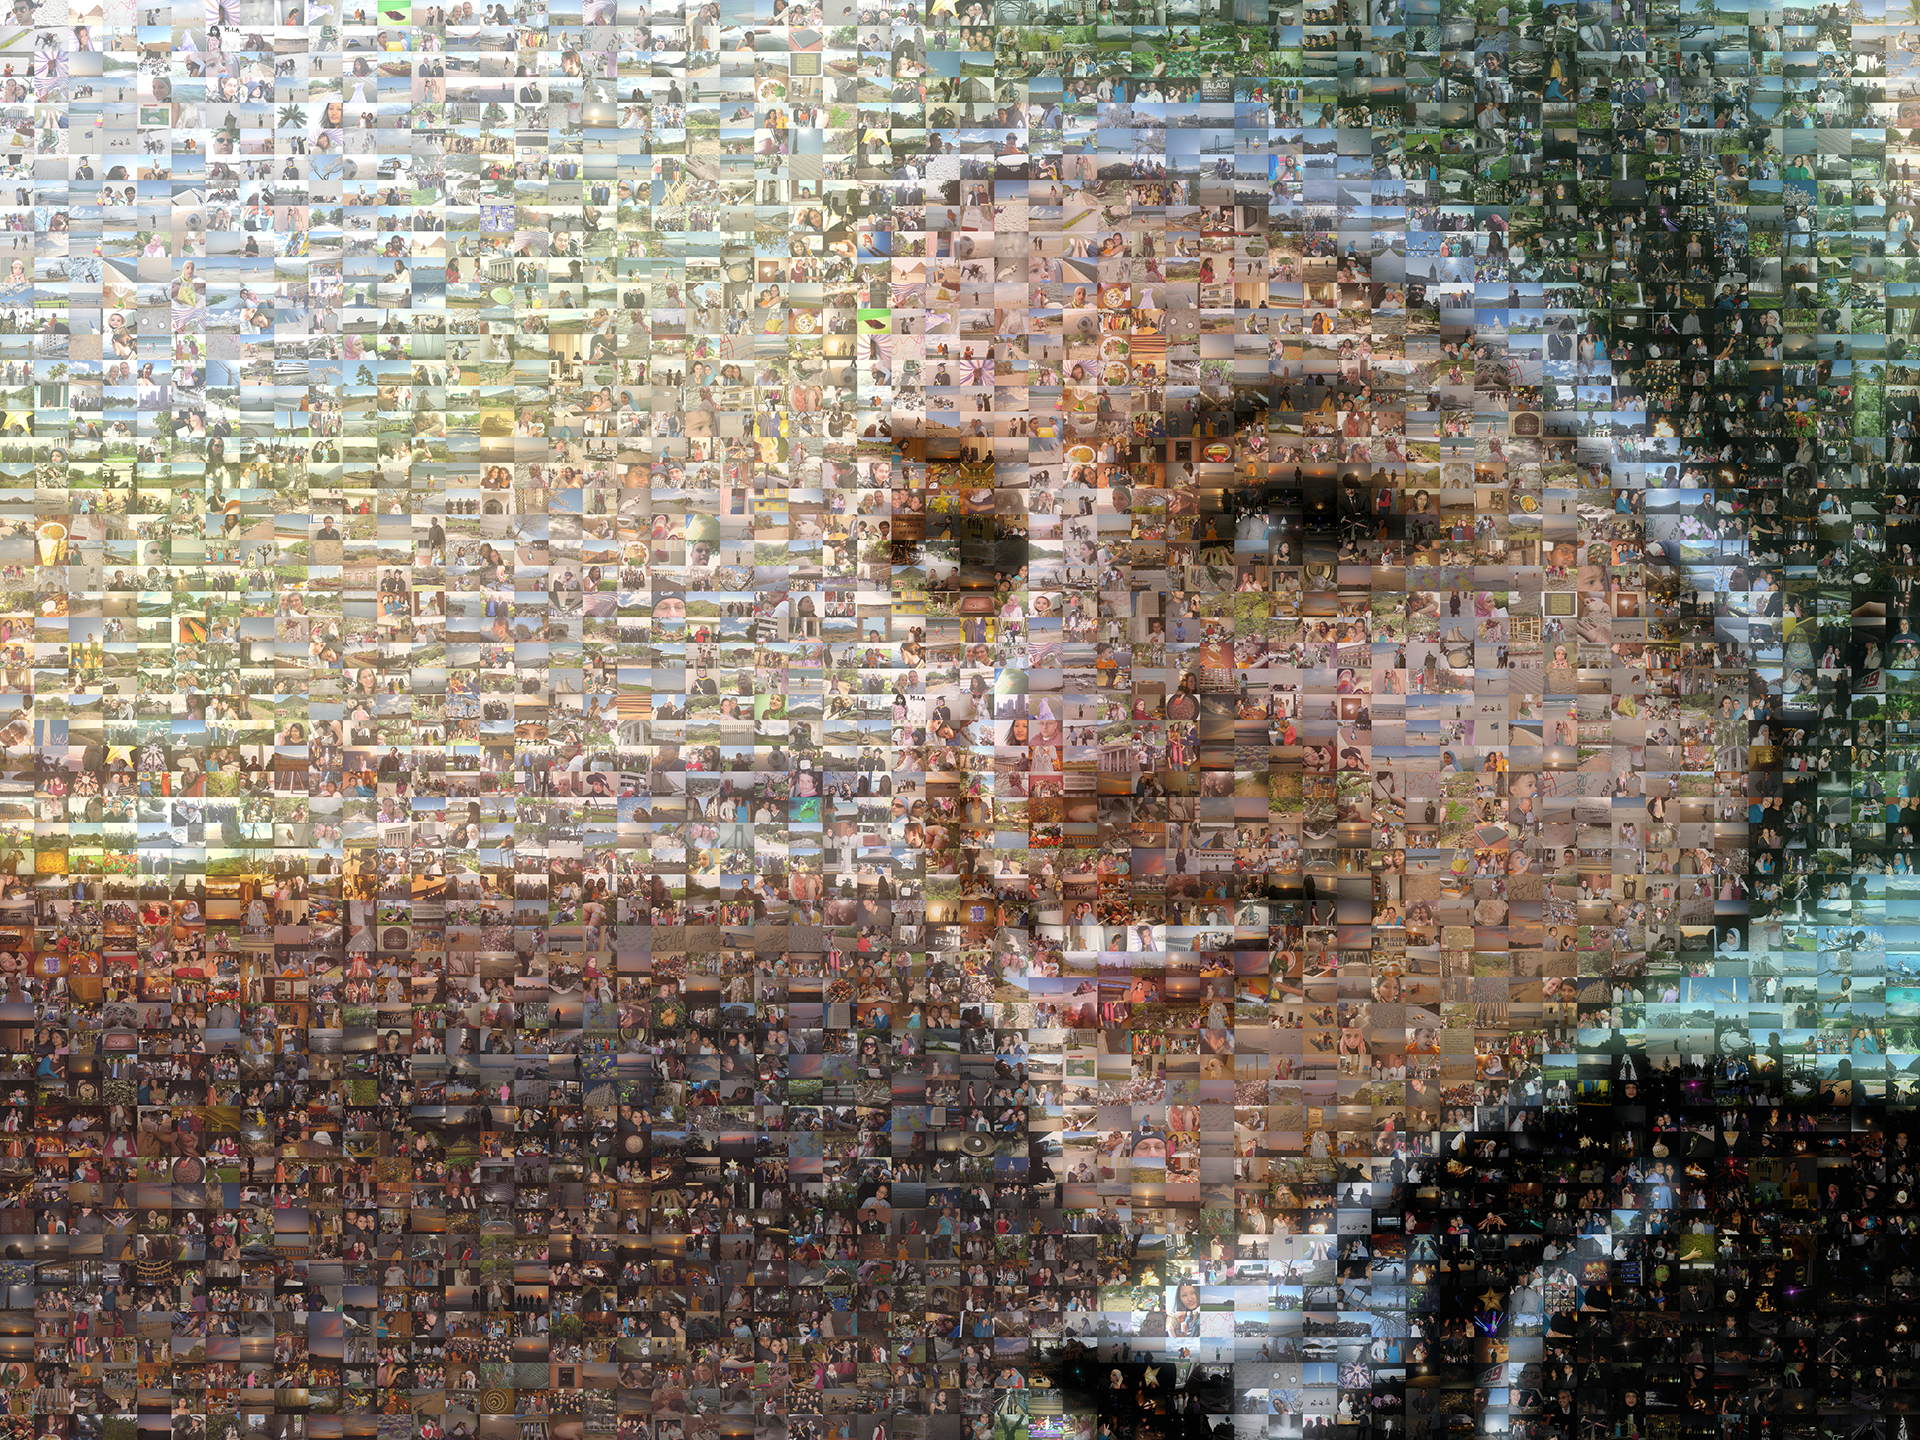 photo mosaic created using 3,061 user submitted photos